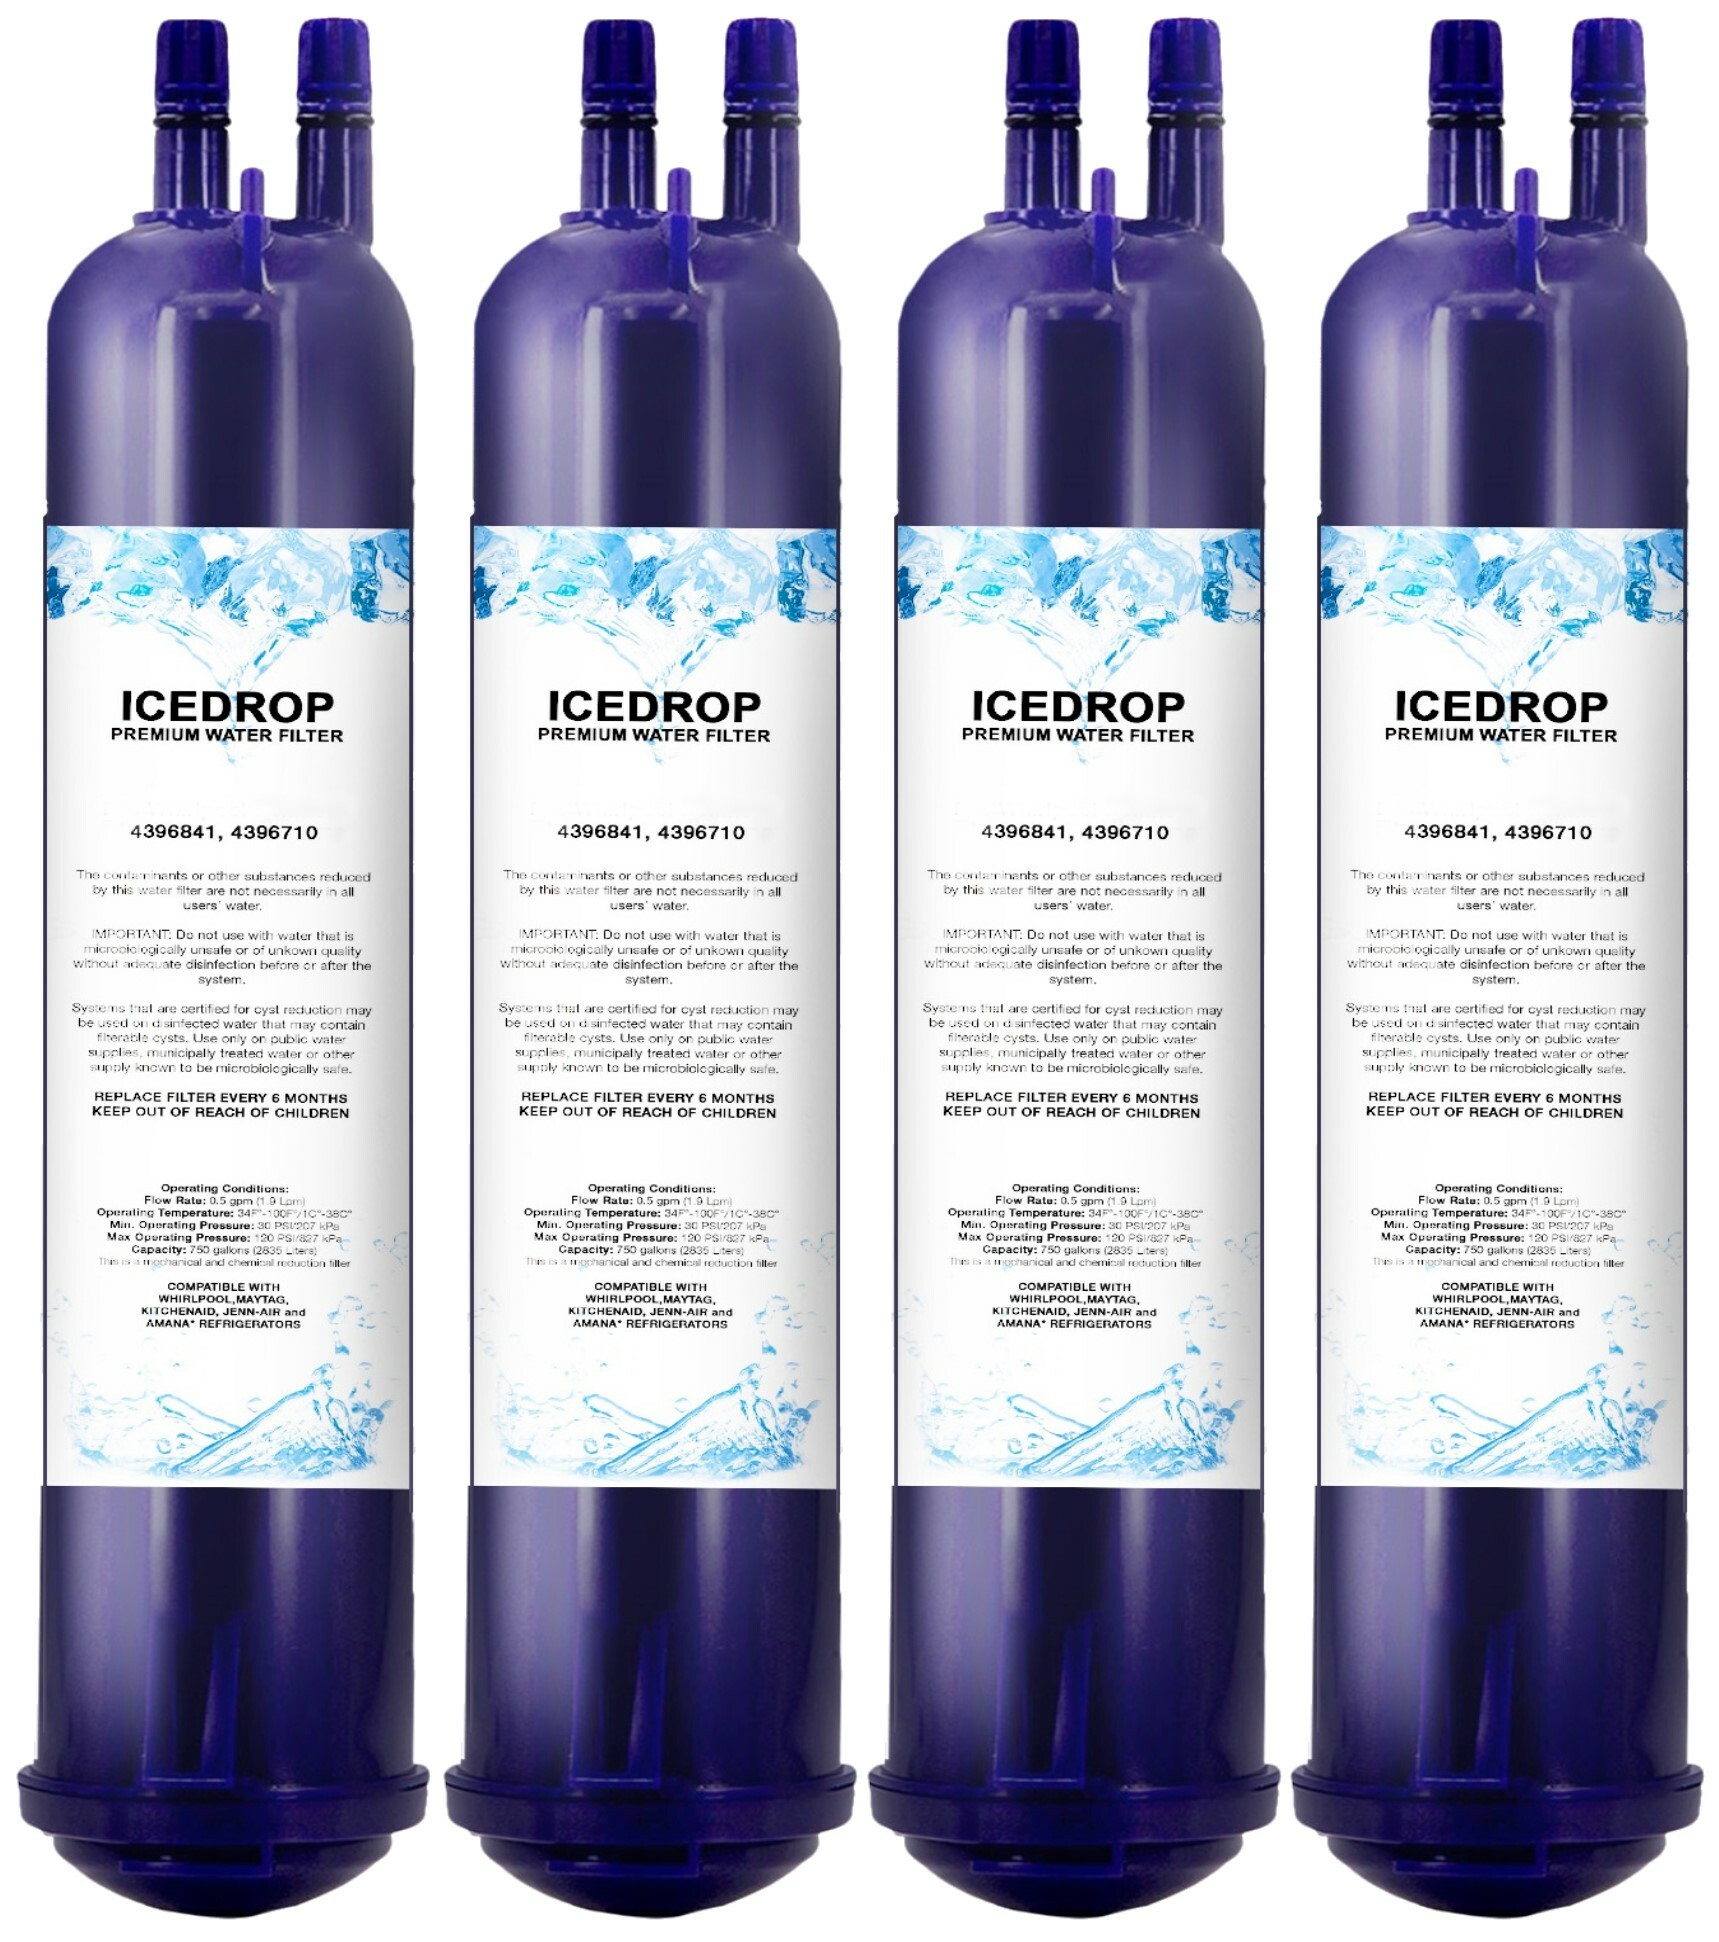 Ice Drop Refrigerator Water Filter Compatible with 4396710B 4396711B EDR3RX1 PUR Filter 3 Kenmore 9020P 9030P 46-9020P W10121146 (4 Pack)